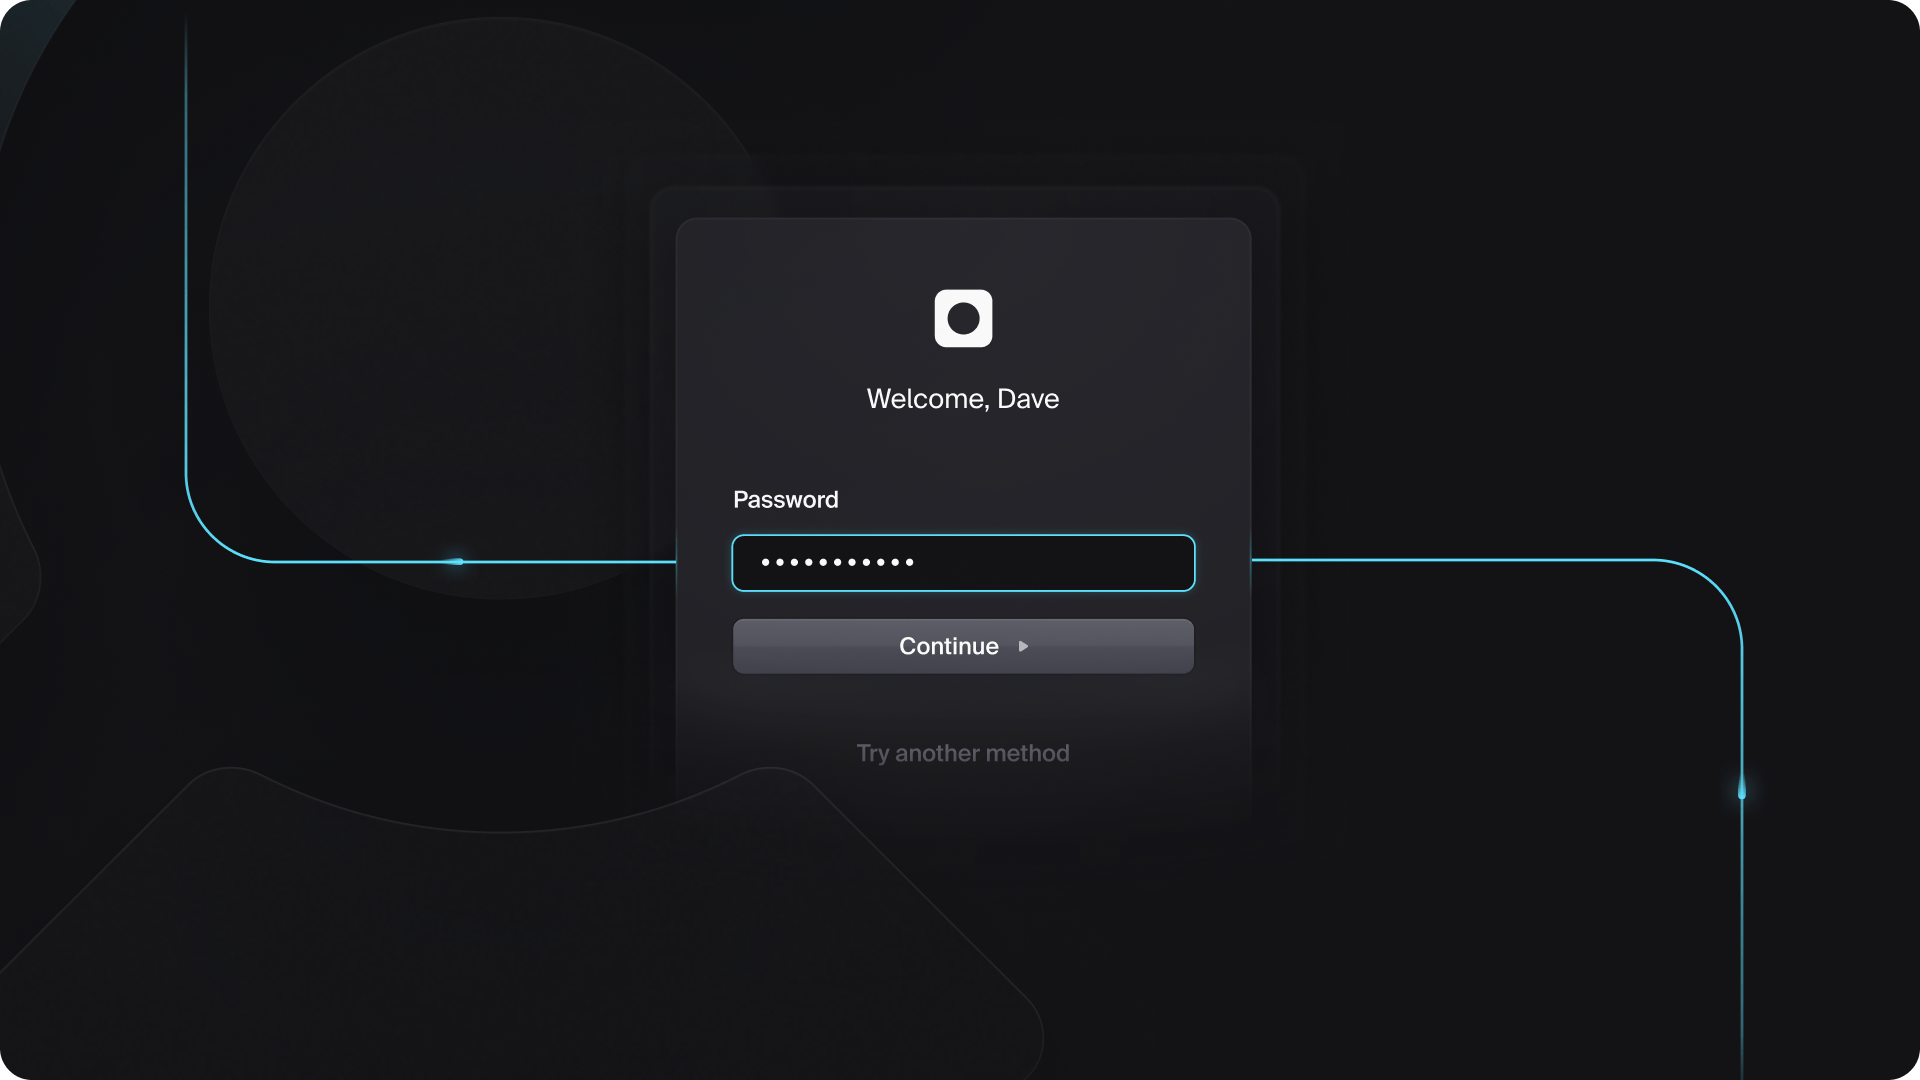 Login screen of a dark webapp featuring Clerk's new UI components (in dark mode). The top says "Welcome, Dave" and below is a filled out password input field.